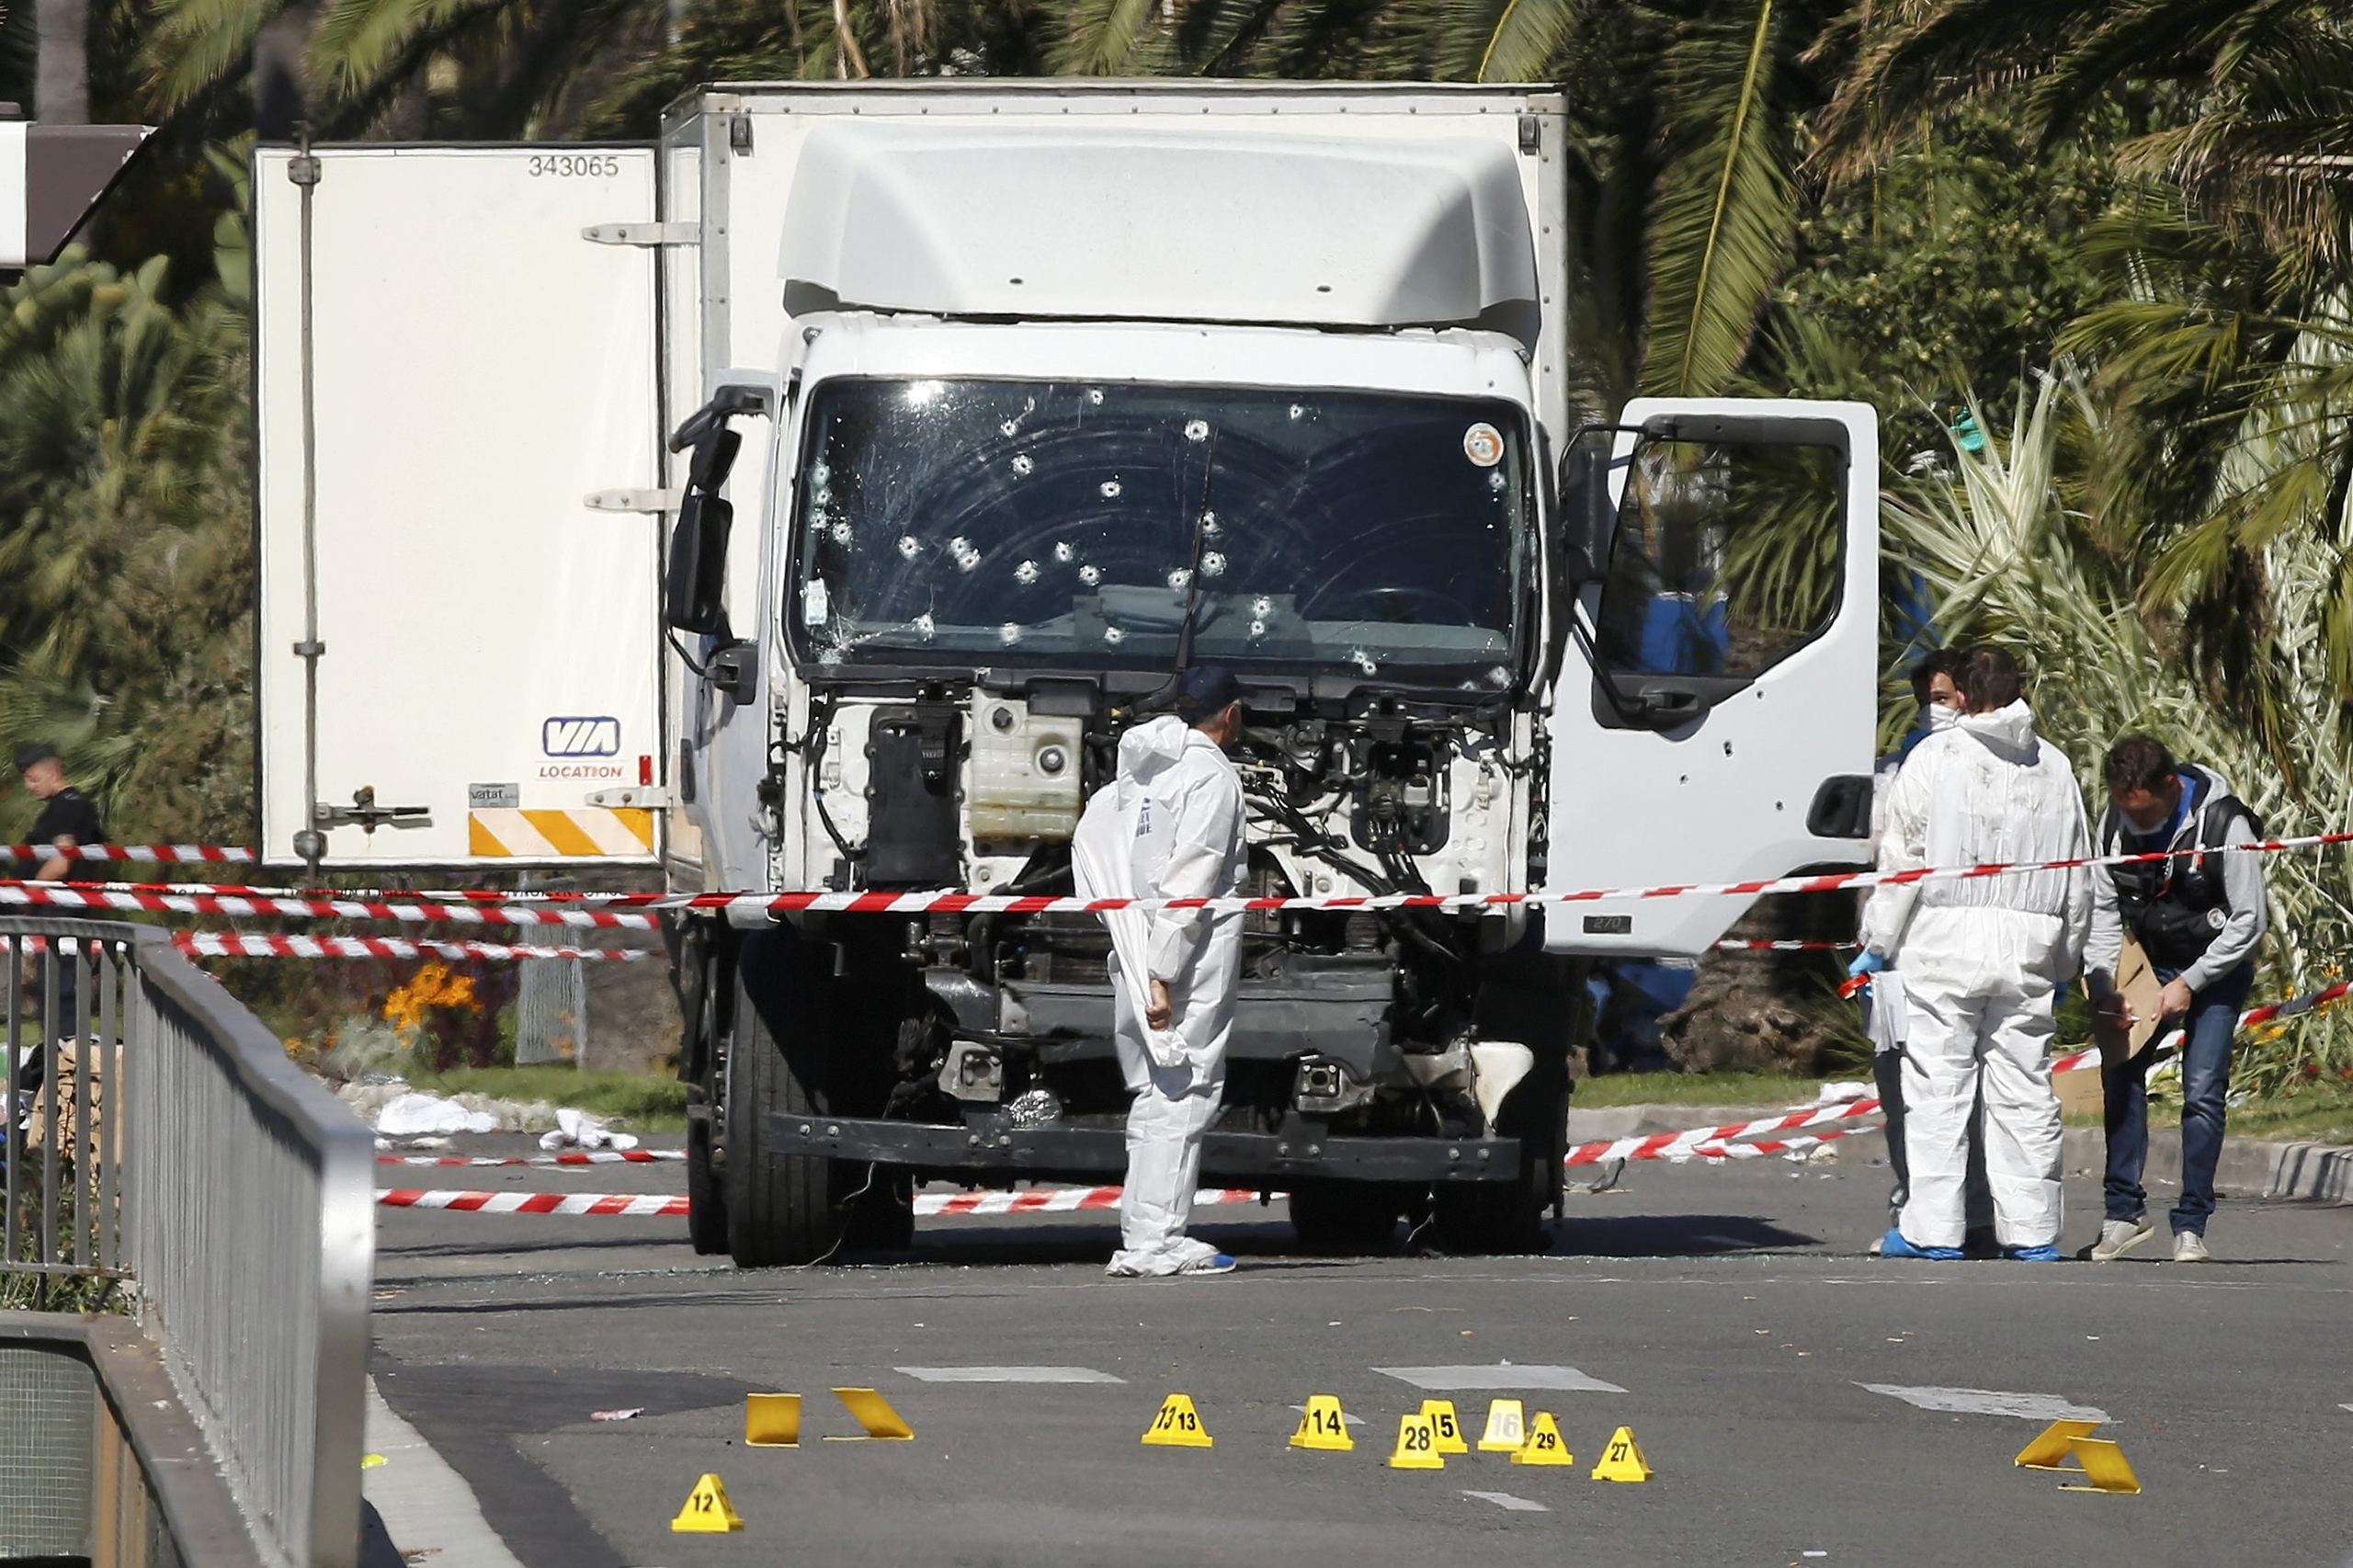 Investigators continue to work at the scene near the truck that was driven into a crowd at high speed, killing scores who were celebrating Bastille Day on July 14, on the Promenade des Anglais in Nice, France, on July 15, 2016. (Eric Gaillard—Reuters)